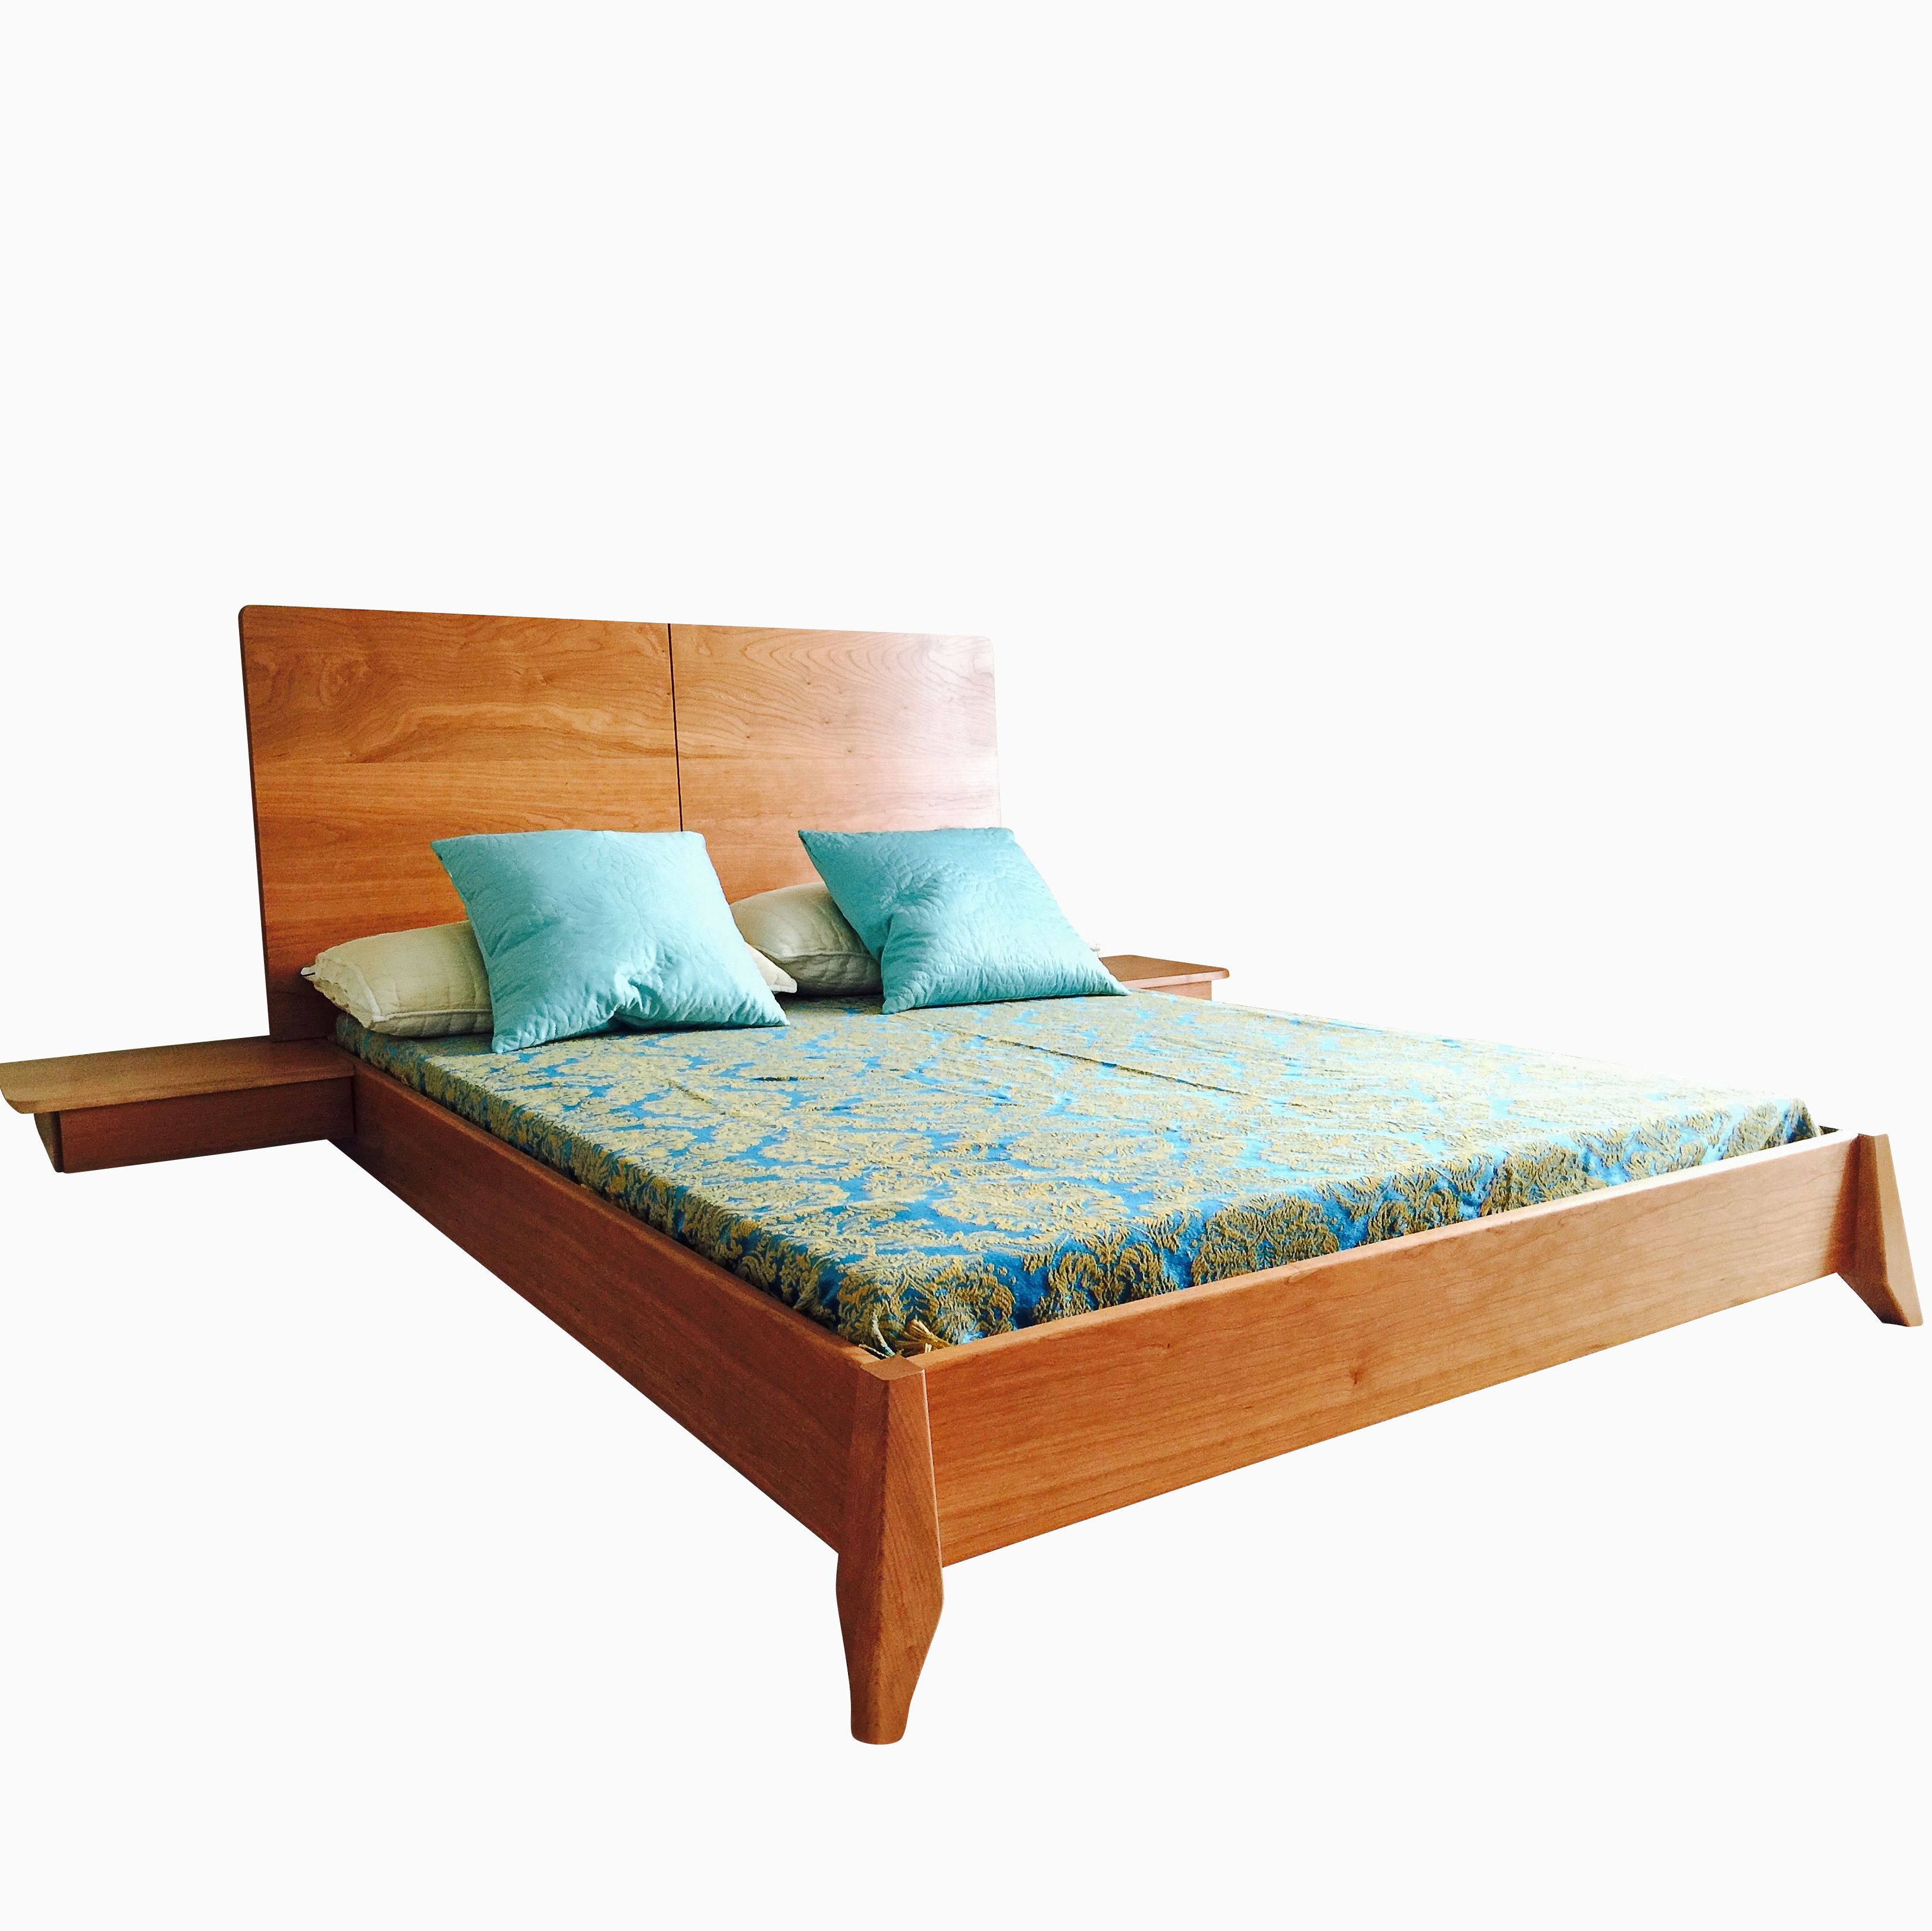 Buy a Hand Made Solid Wood Platform Bed, made to order from Marco ...